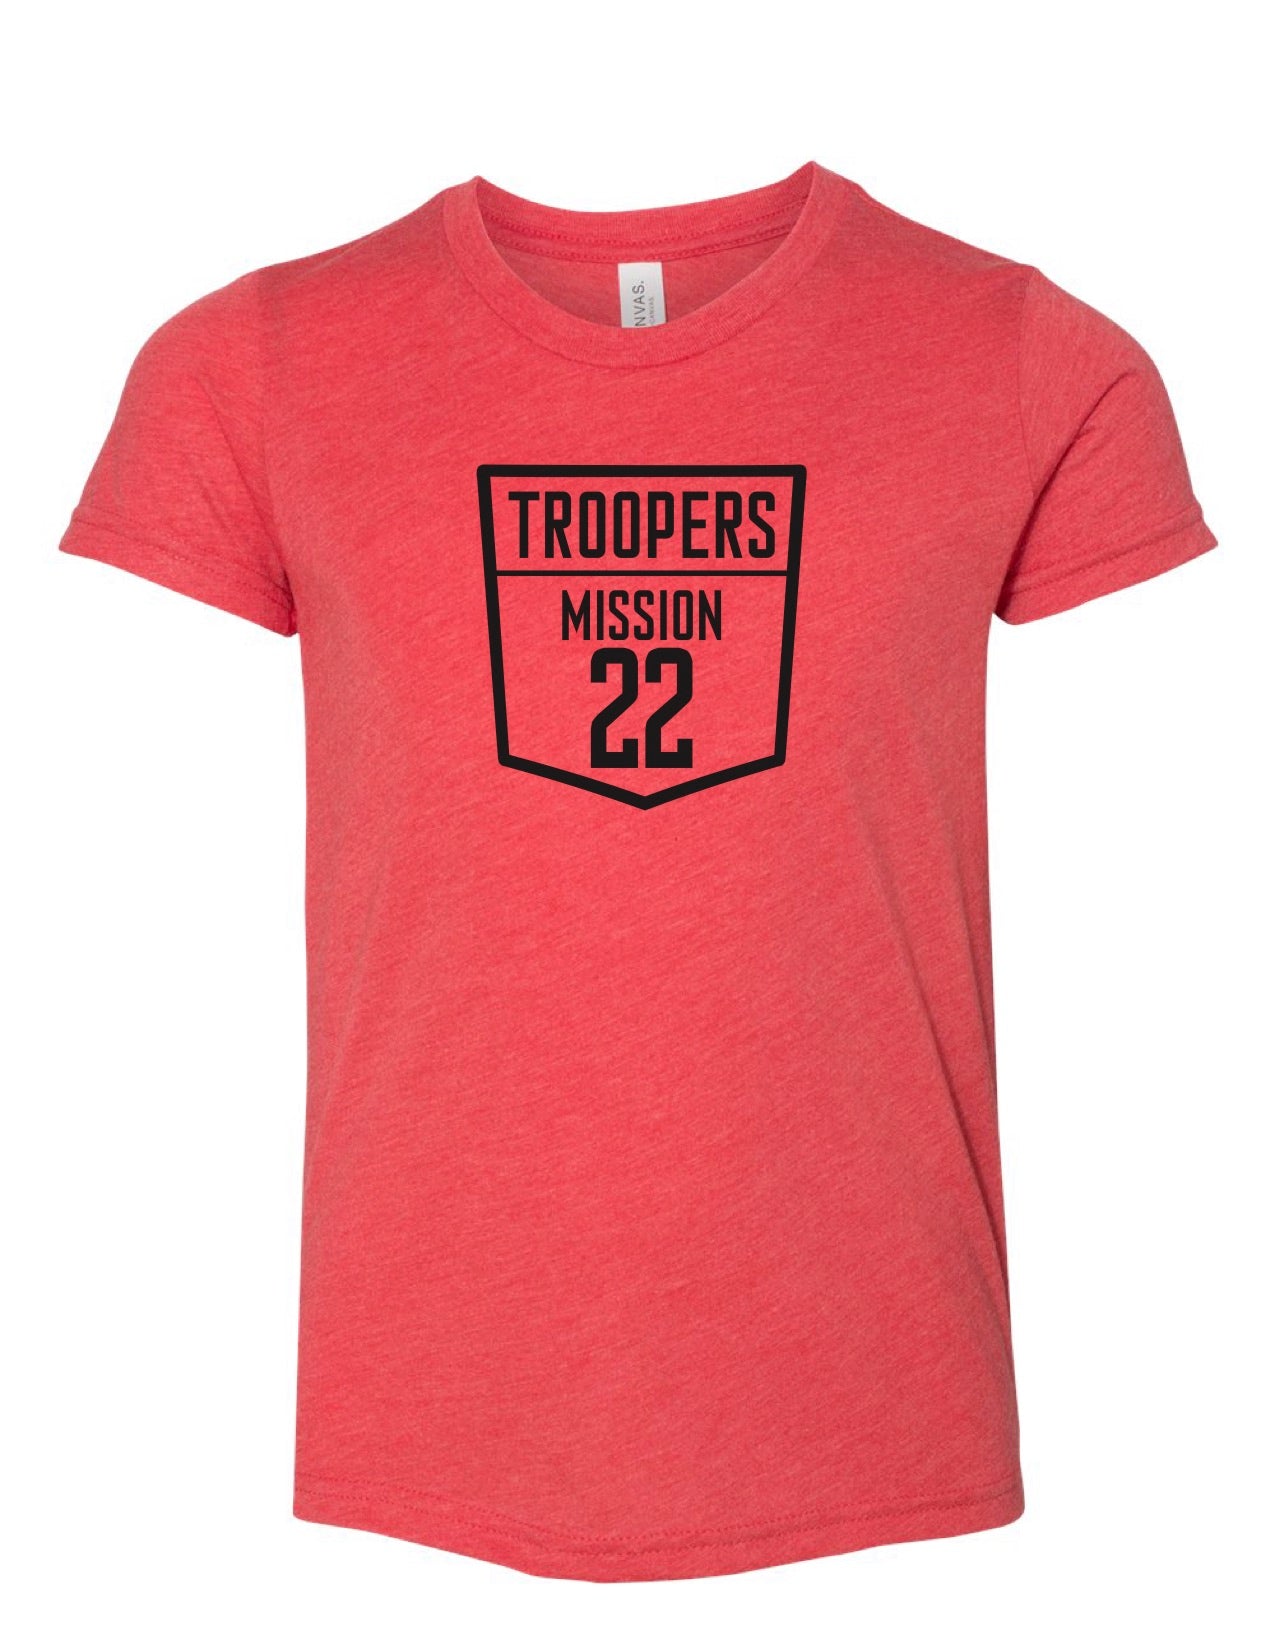 Product Image of Mission Trooper Youth Tees #1